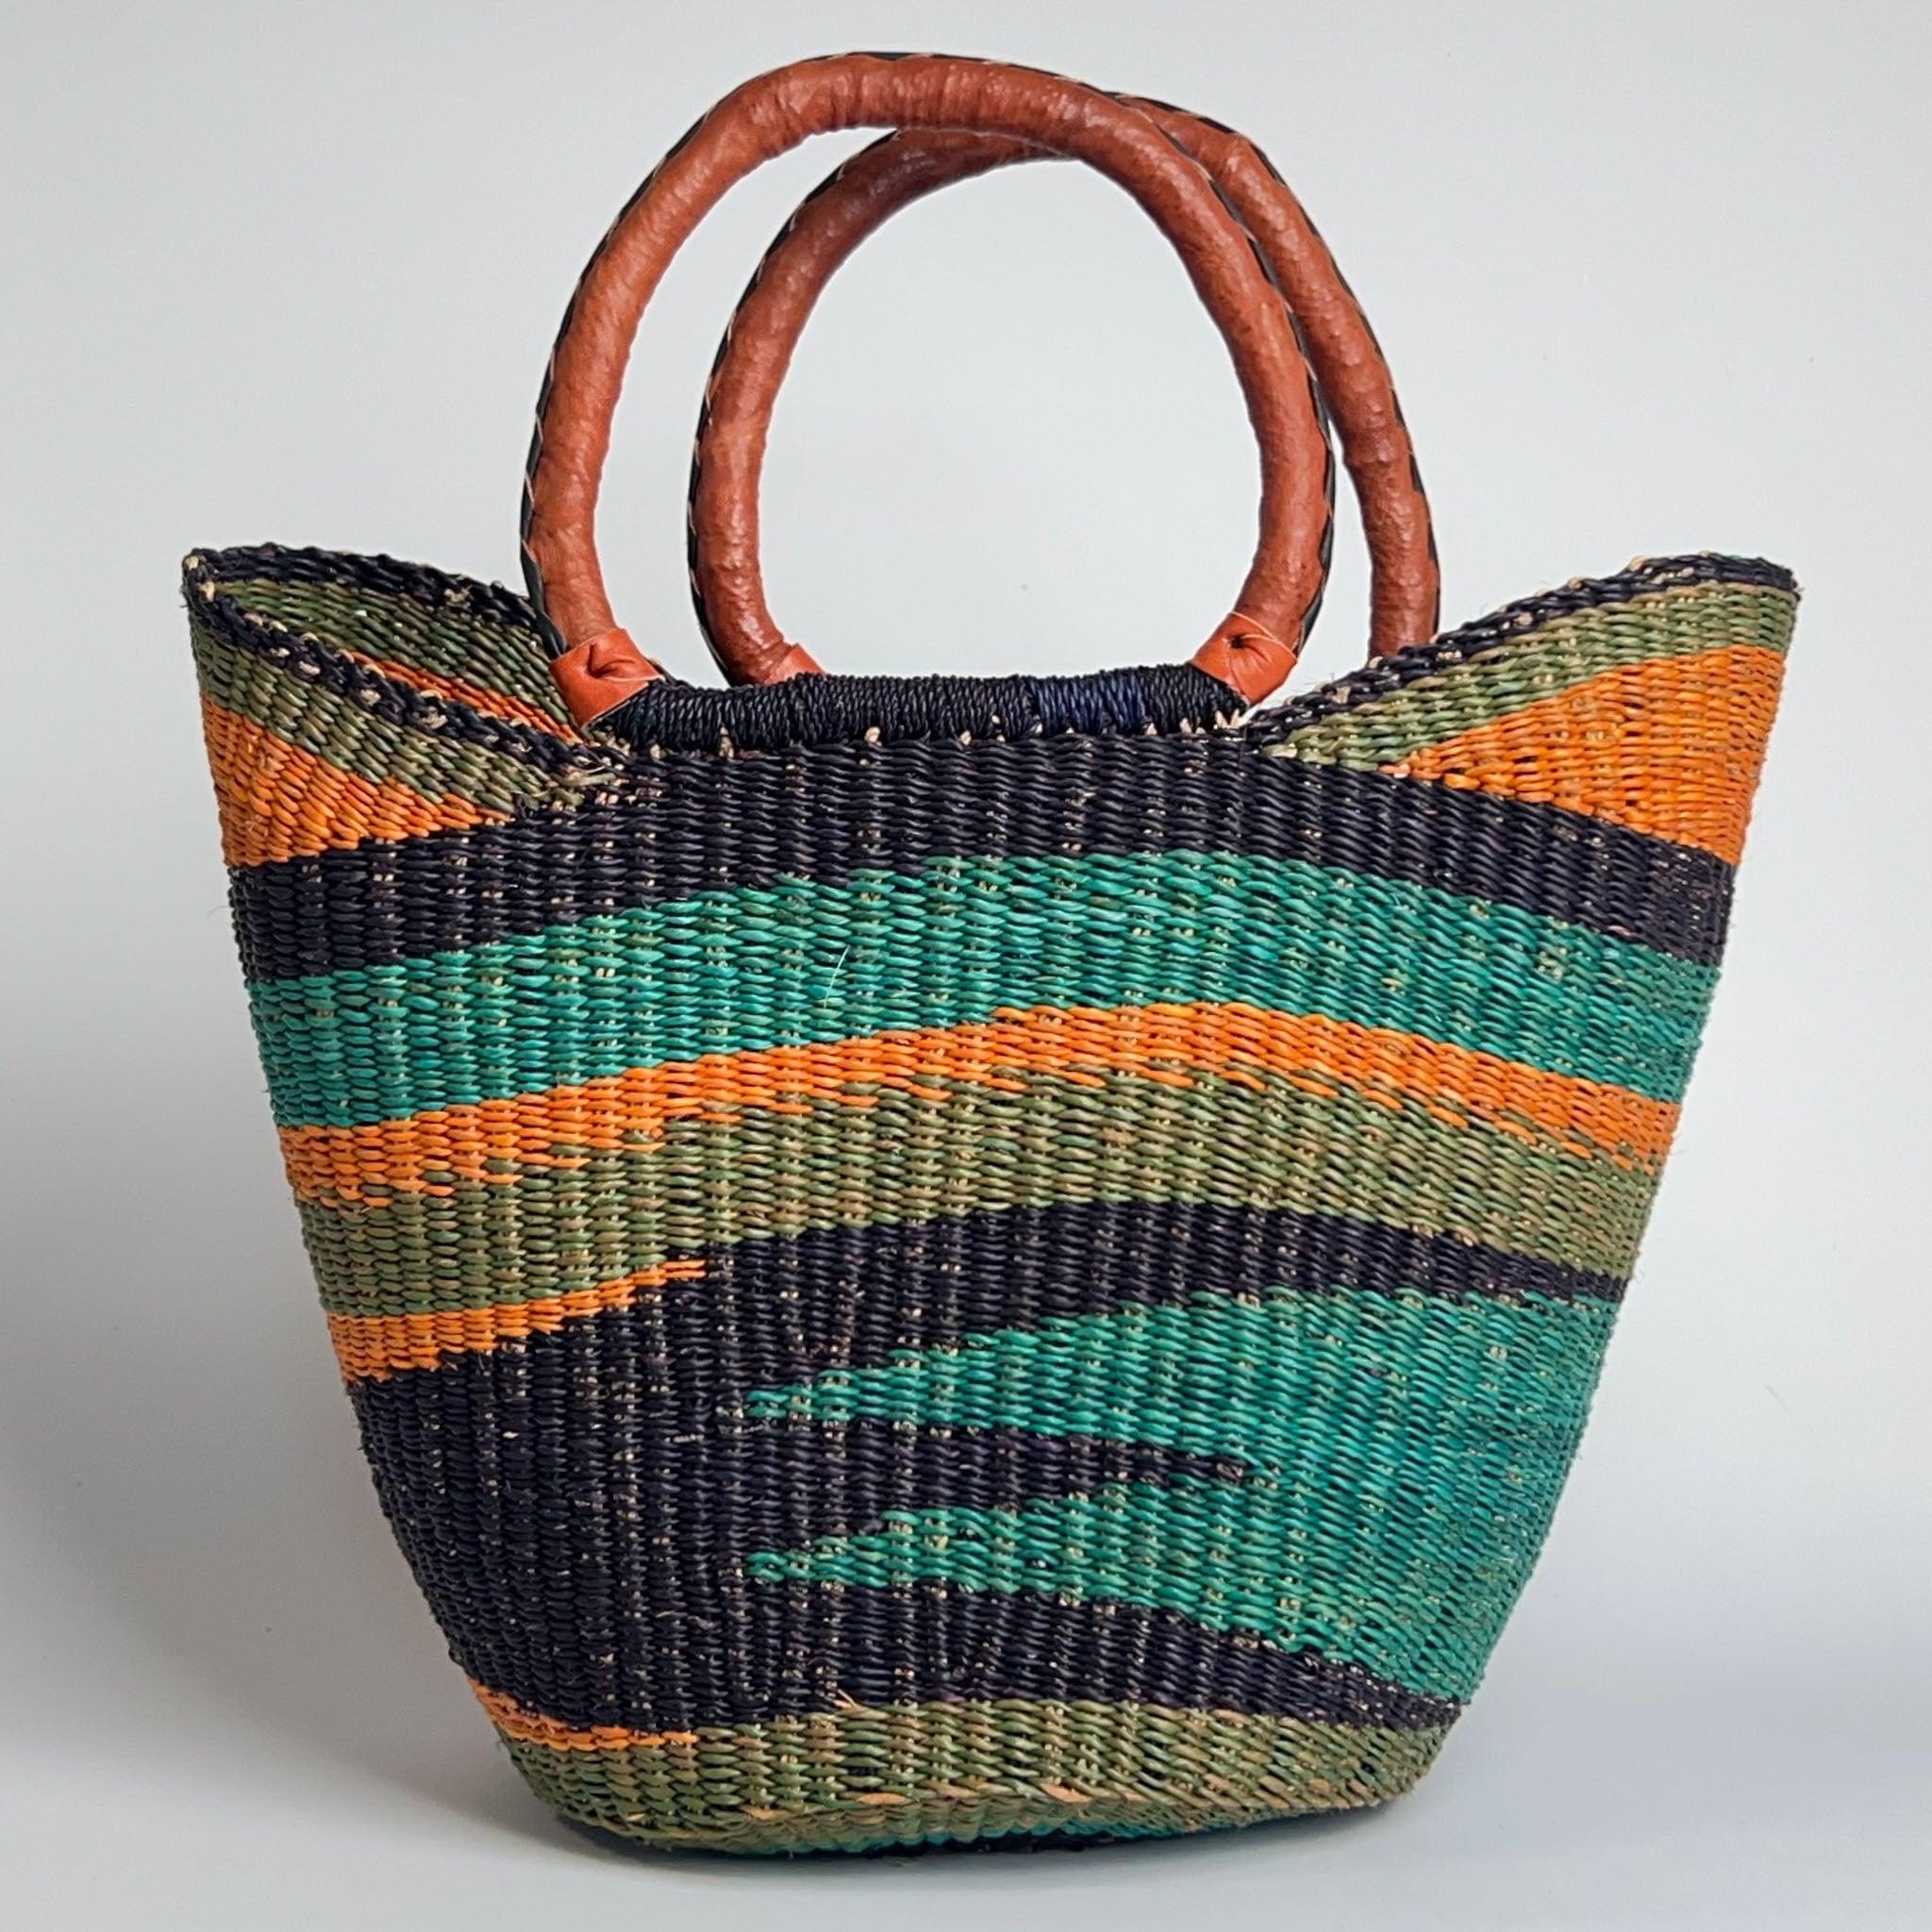 Blue, teal and orange U style African basket in a bold and striking design and with tan leather handles.